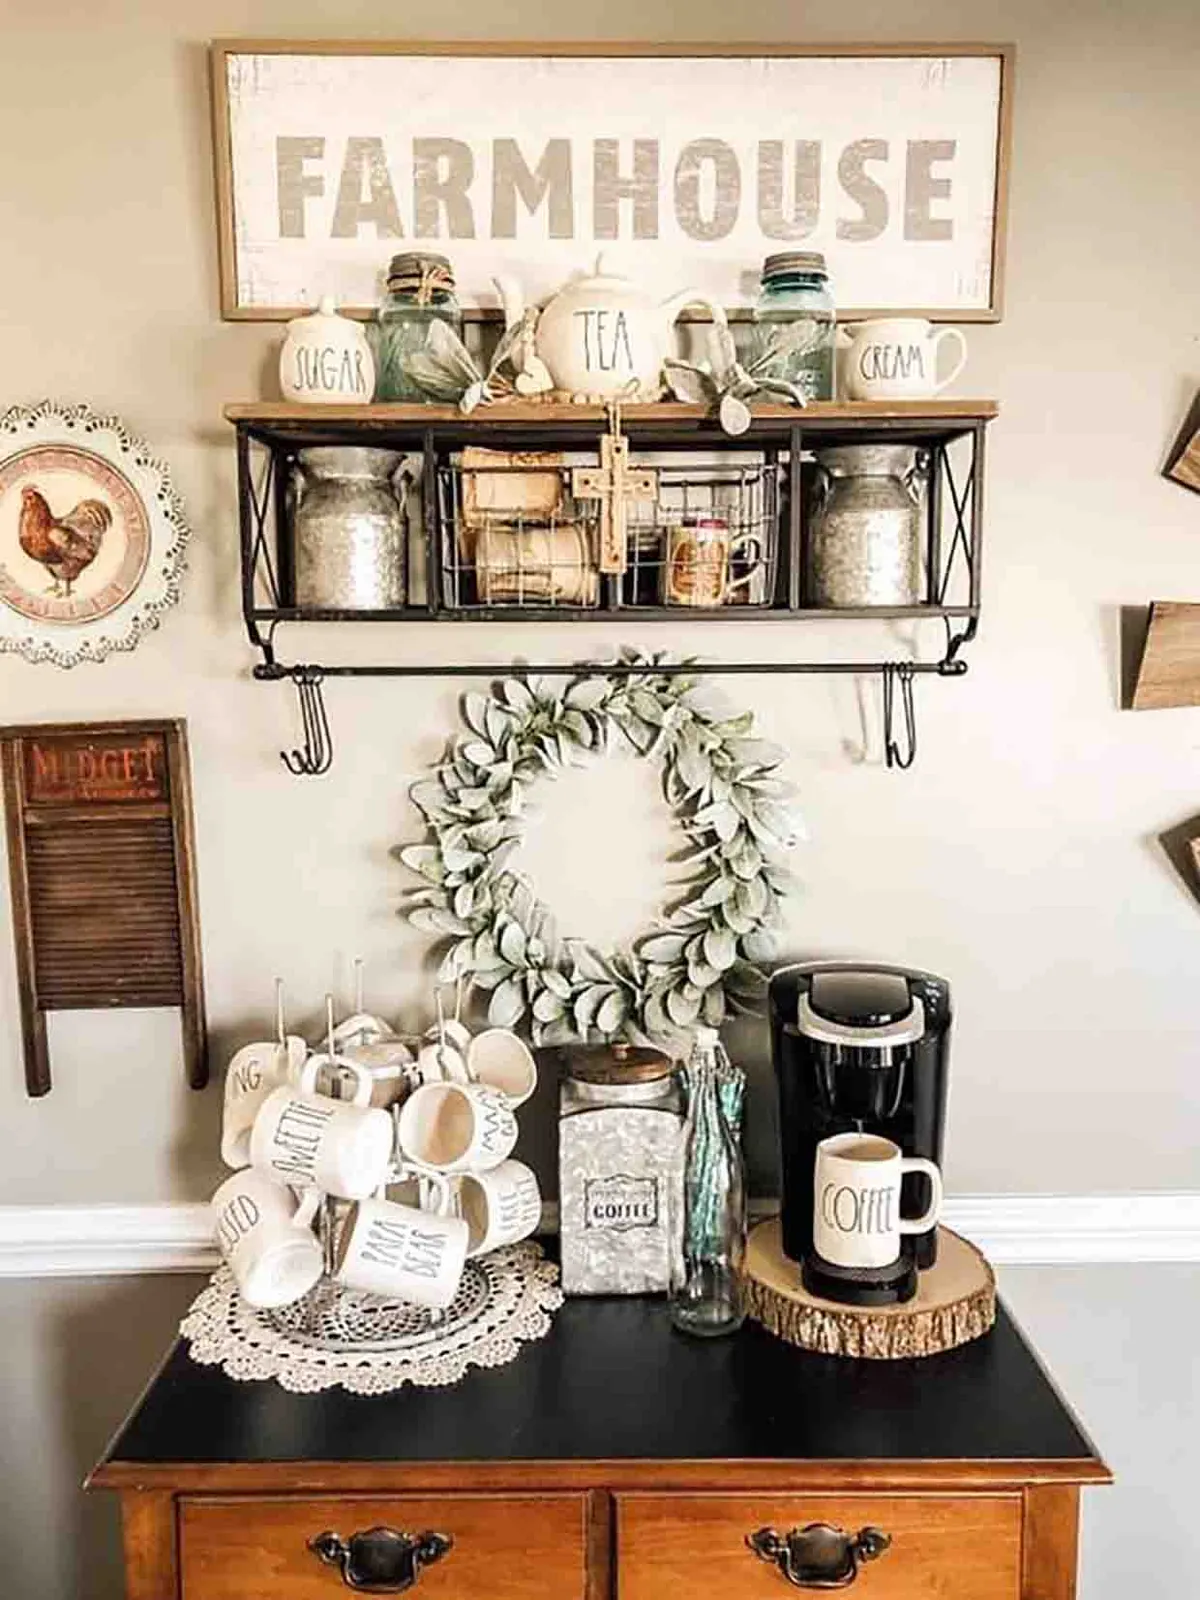 Feel inspired with these DIY home coffee bar ideas - Gathered